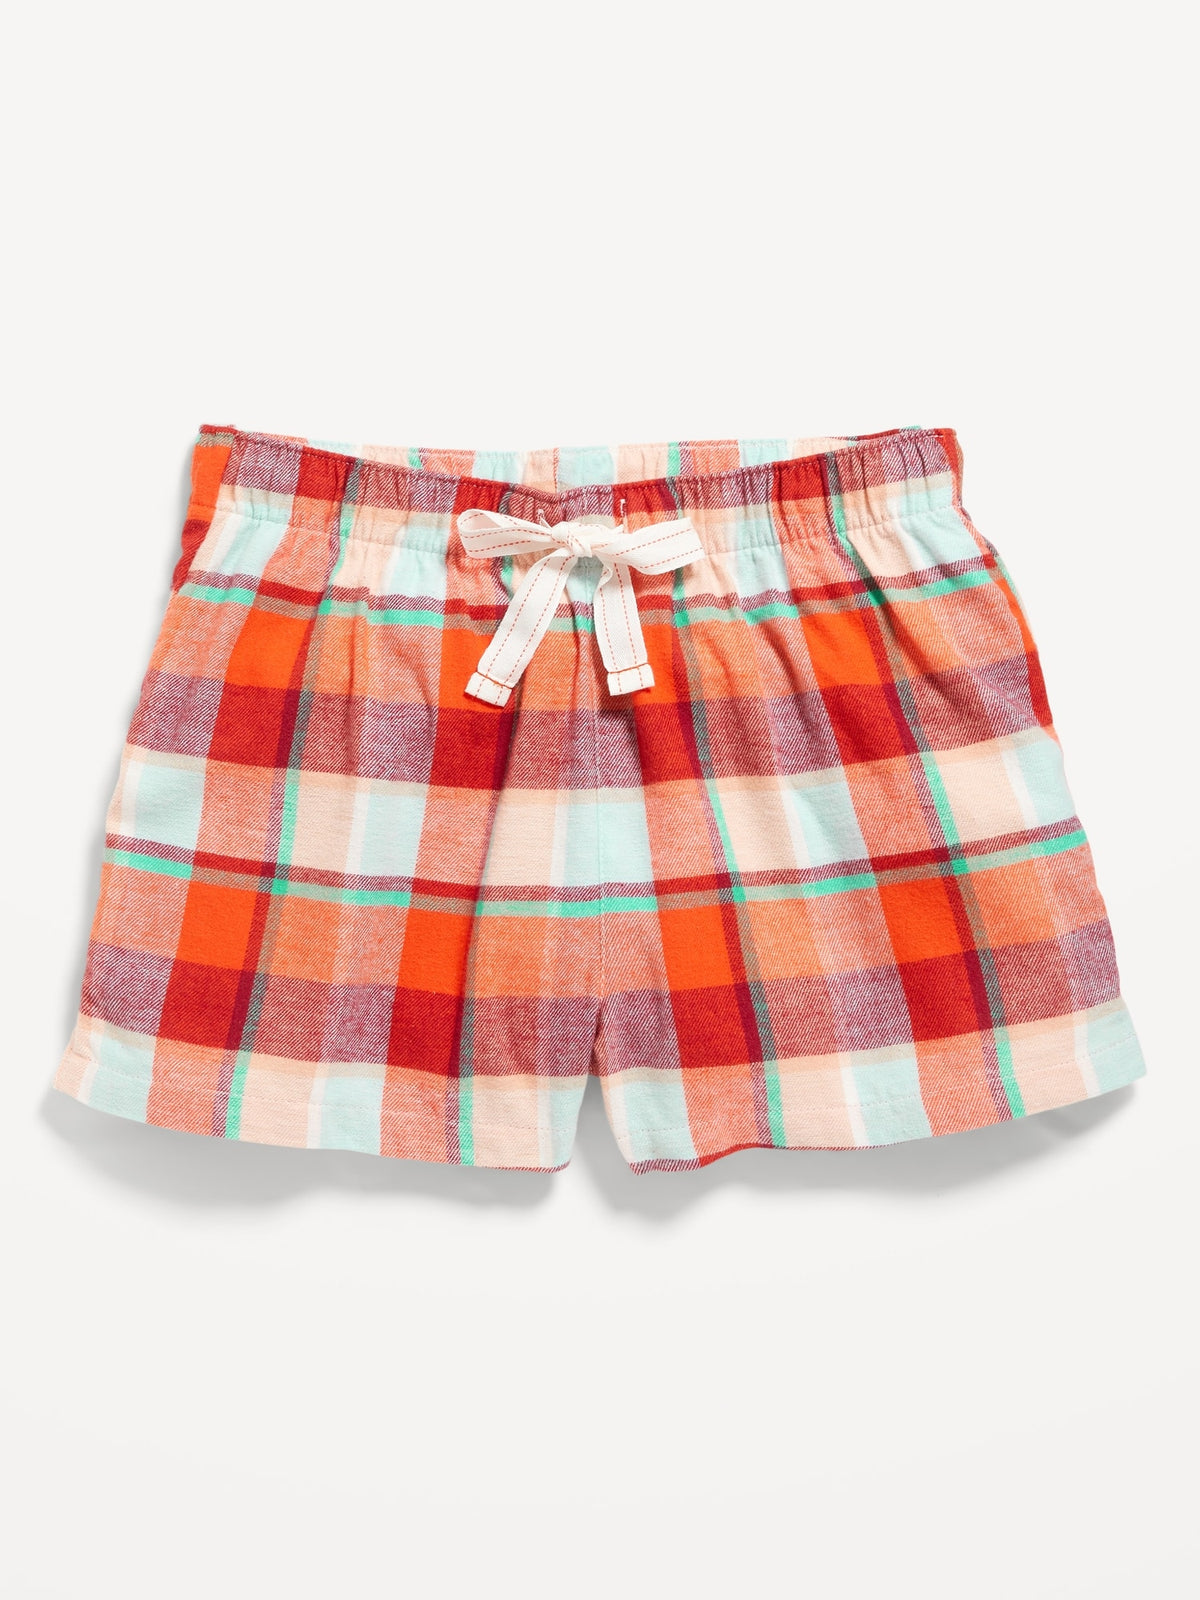 Matching Flannel Pajama Shorts for Women -- 2.5-inch inseam, Old Navy